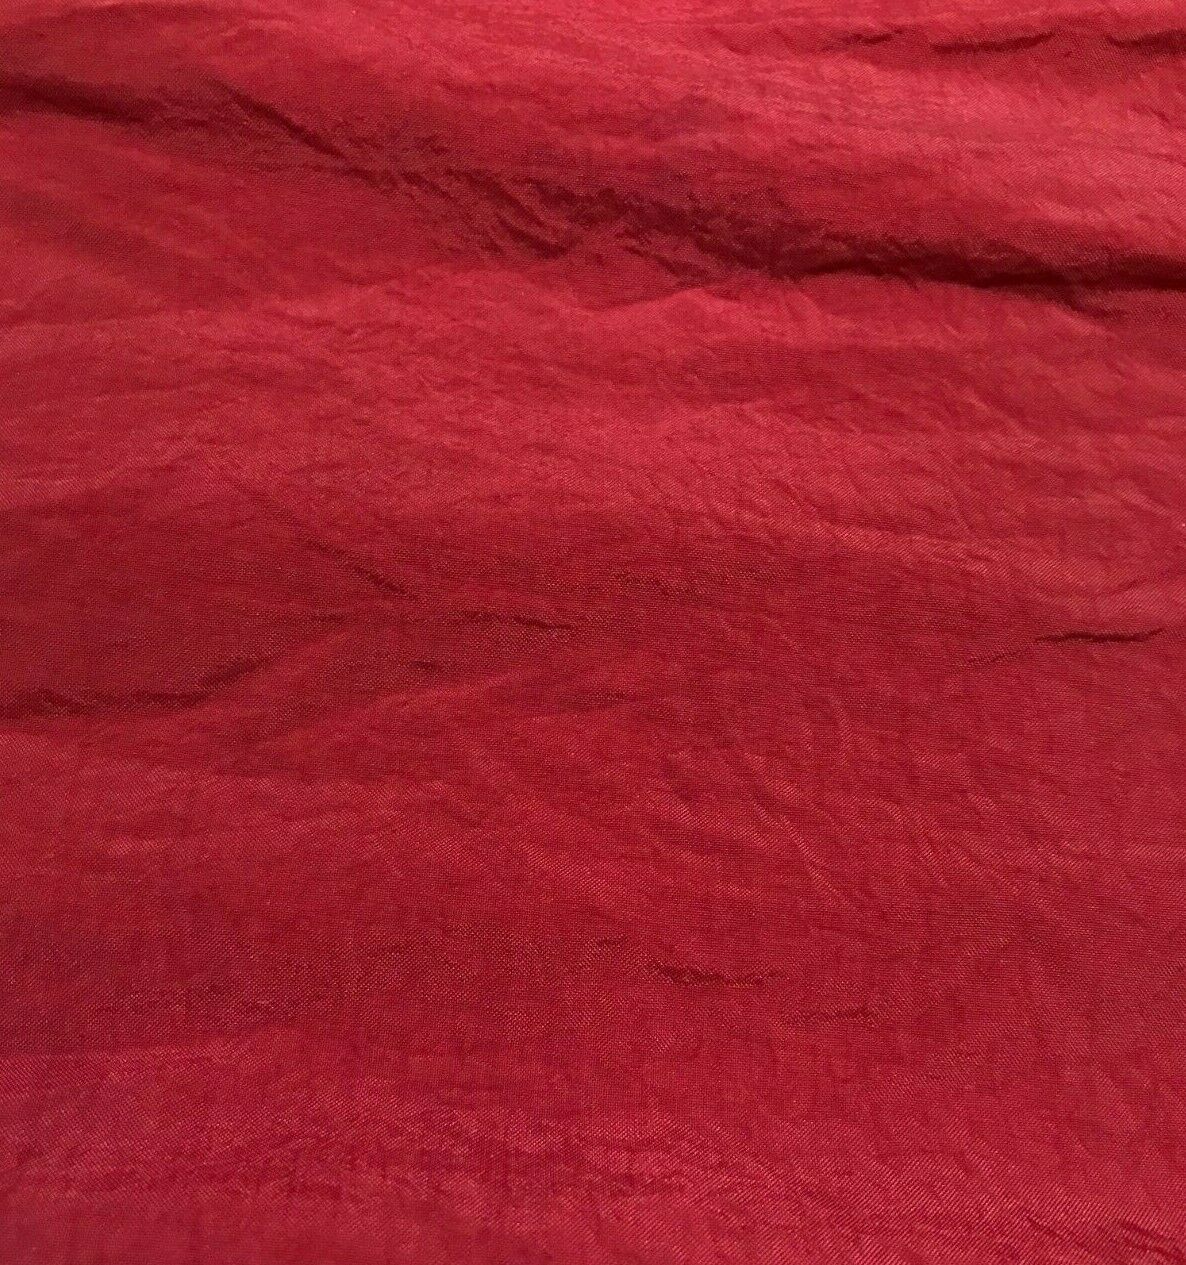 DARK RED CRINCKLED (TAFFETA TOUCH) FABRIC - SOLD BY THE METRE